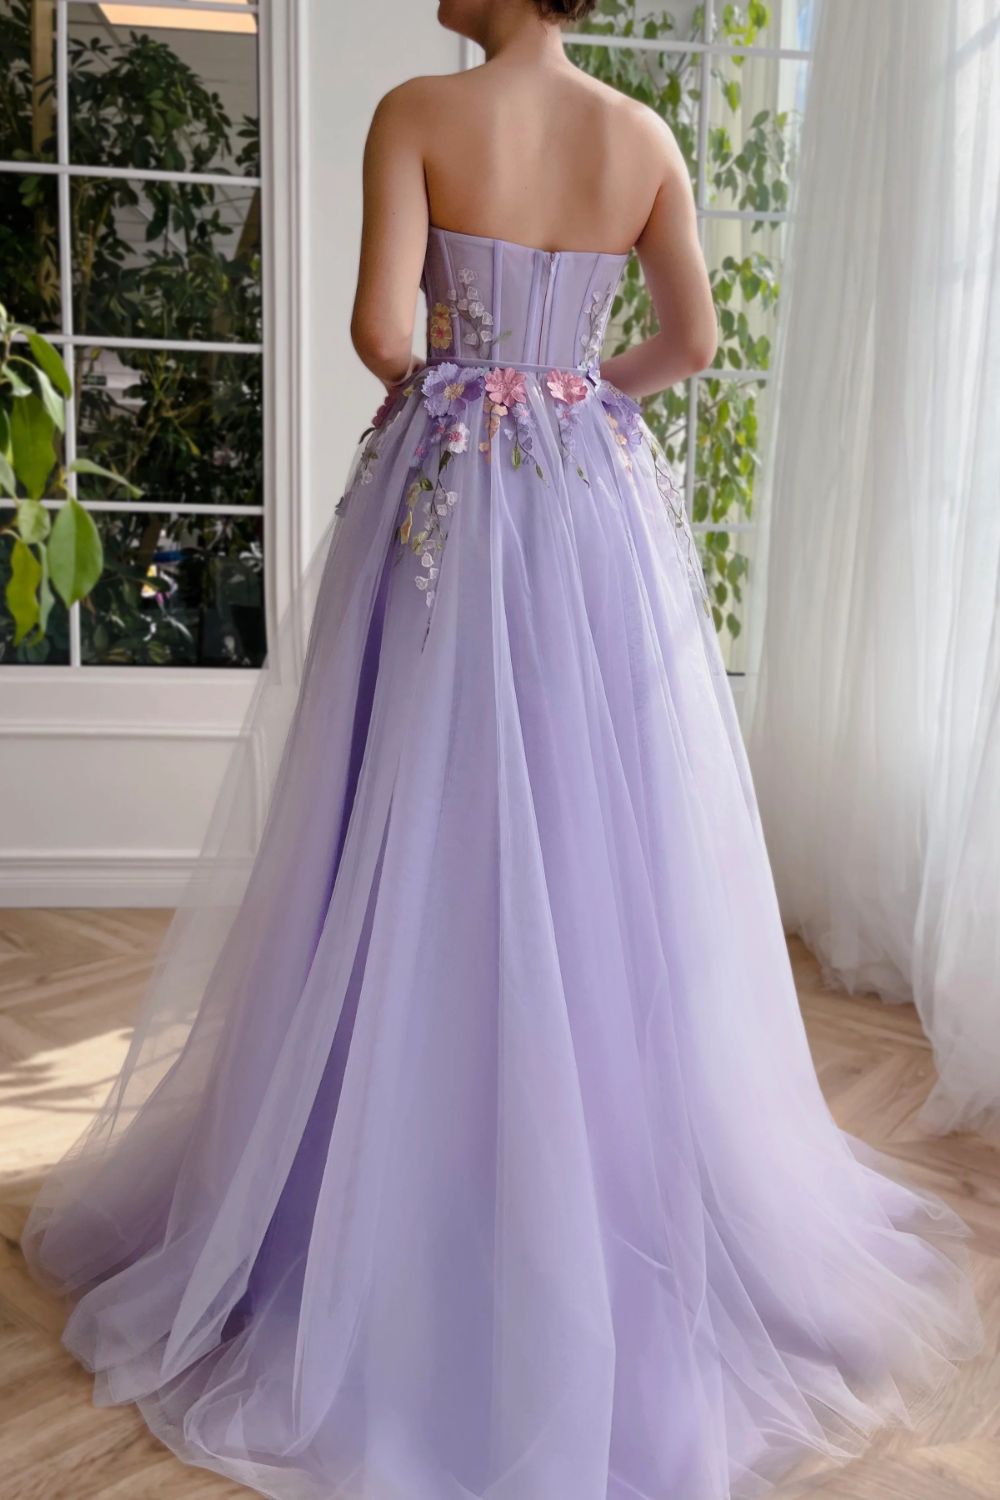 Dressime A Line Sweetheart Tulle Long Evening Dresses Prom Dresses With 3D Flower